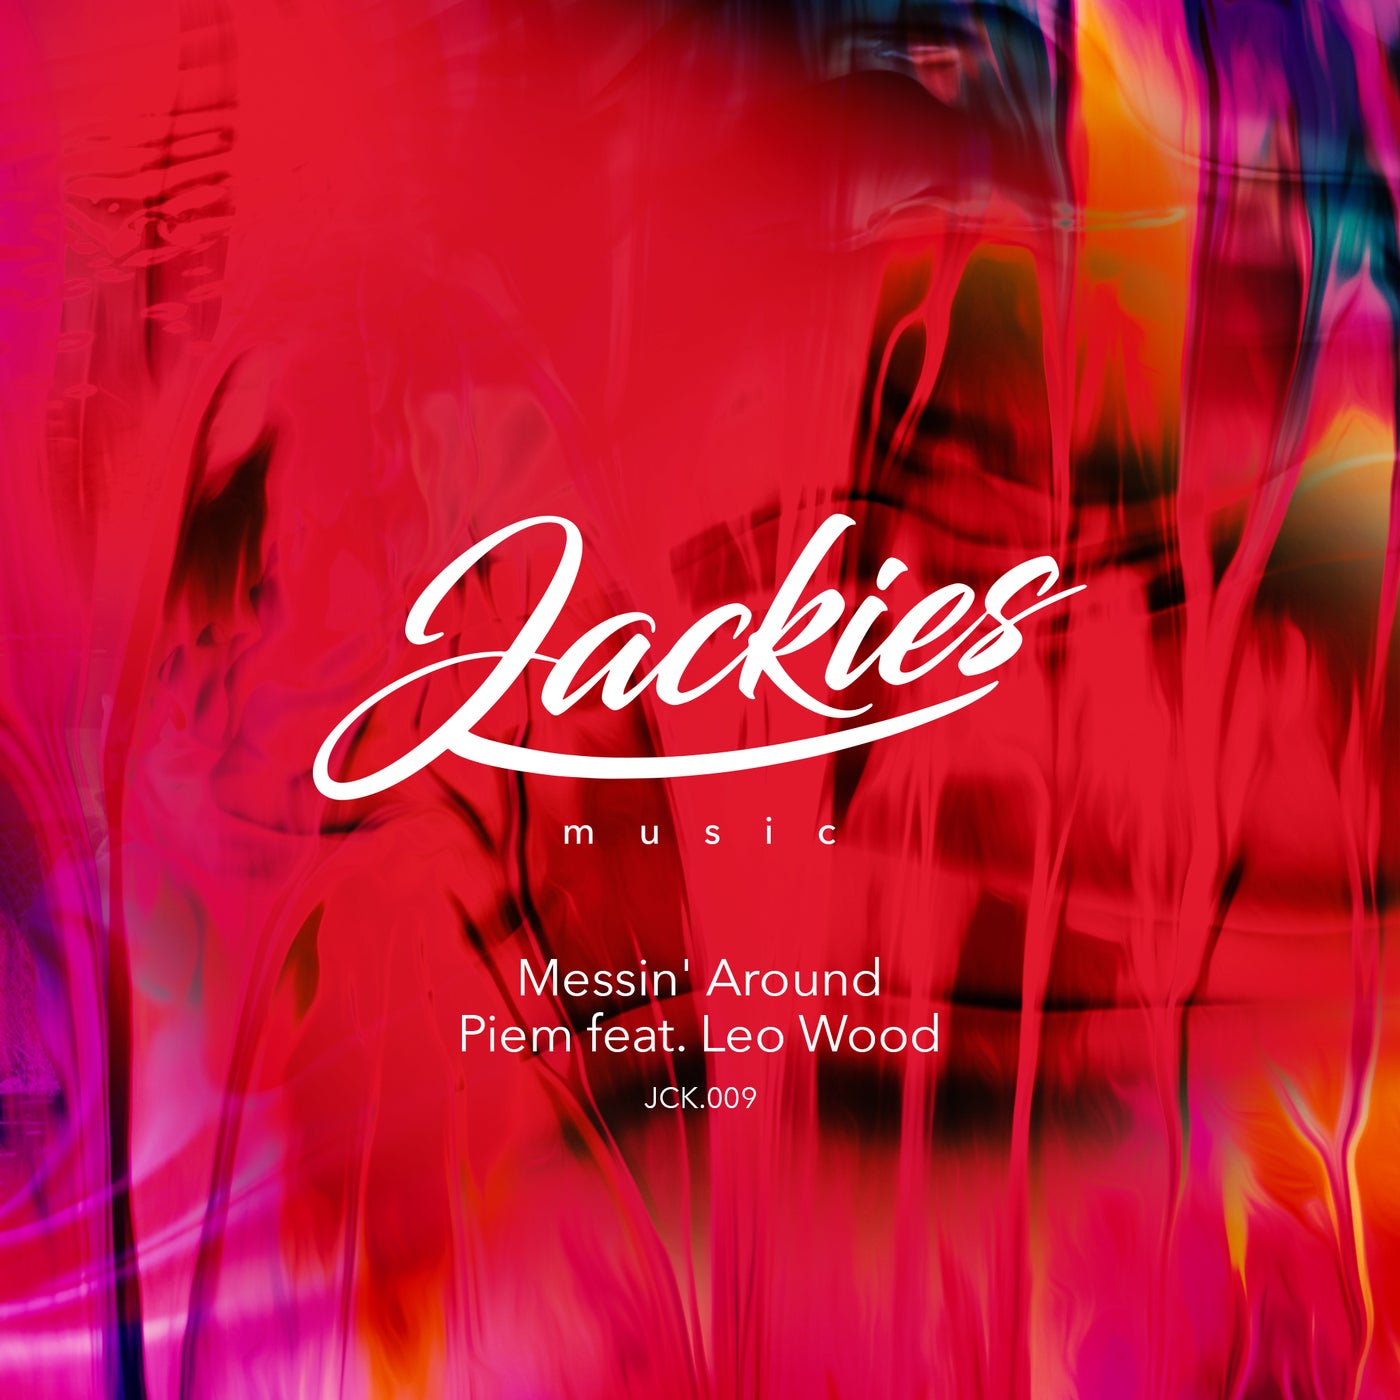 image cover: Piem, Leo Wood - Messin' Around on Jackies Music Records